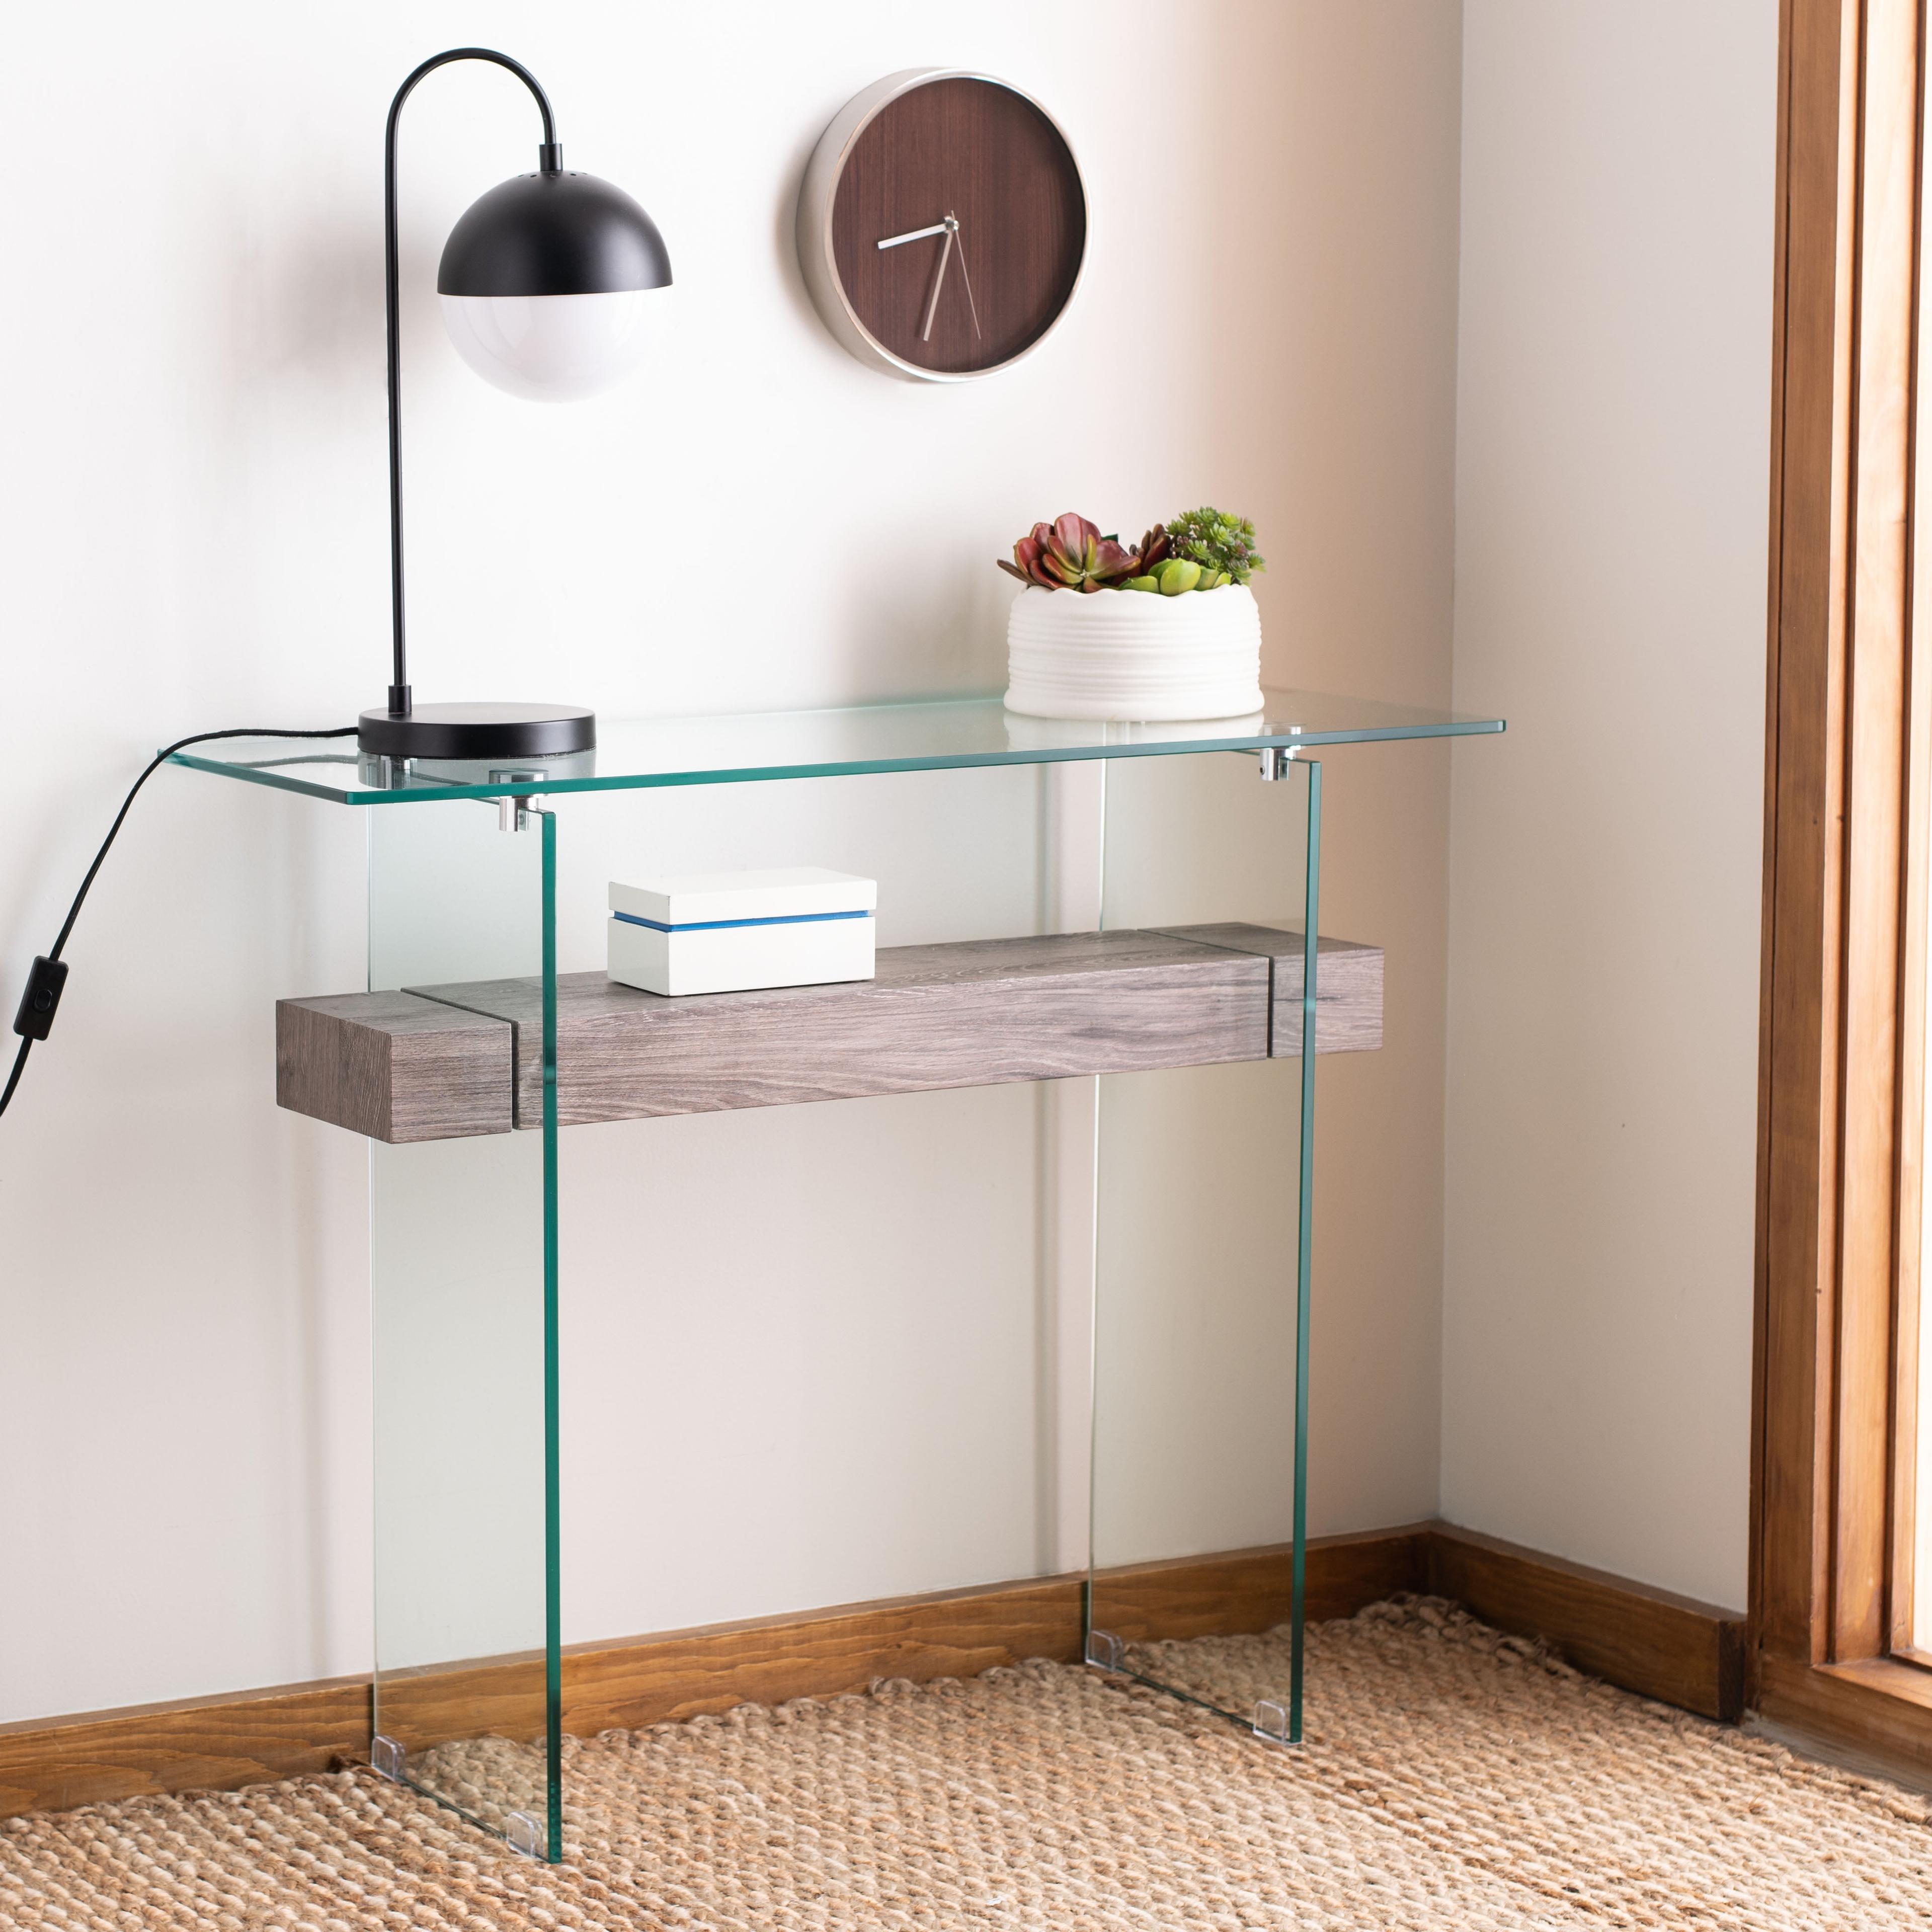 Kayley Grey Oak and Glass Console Table with Geometric Lines